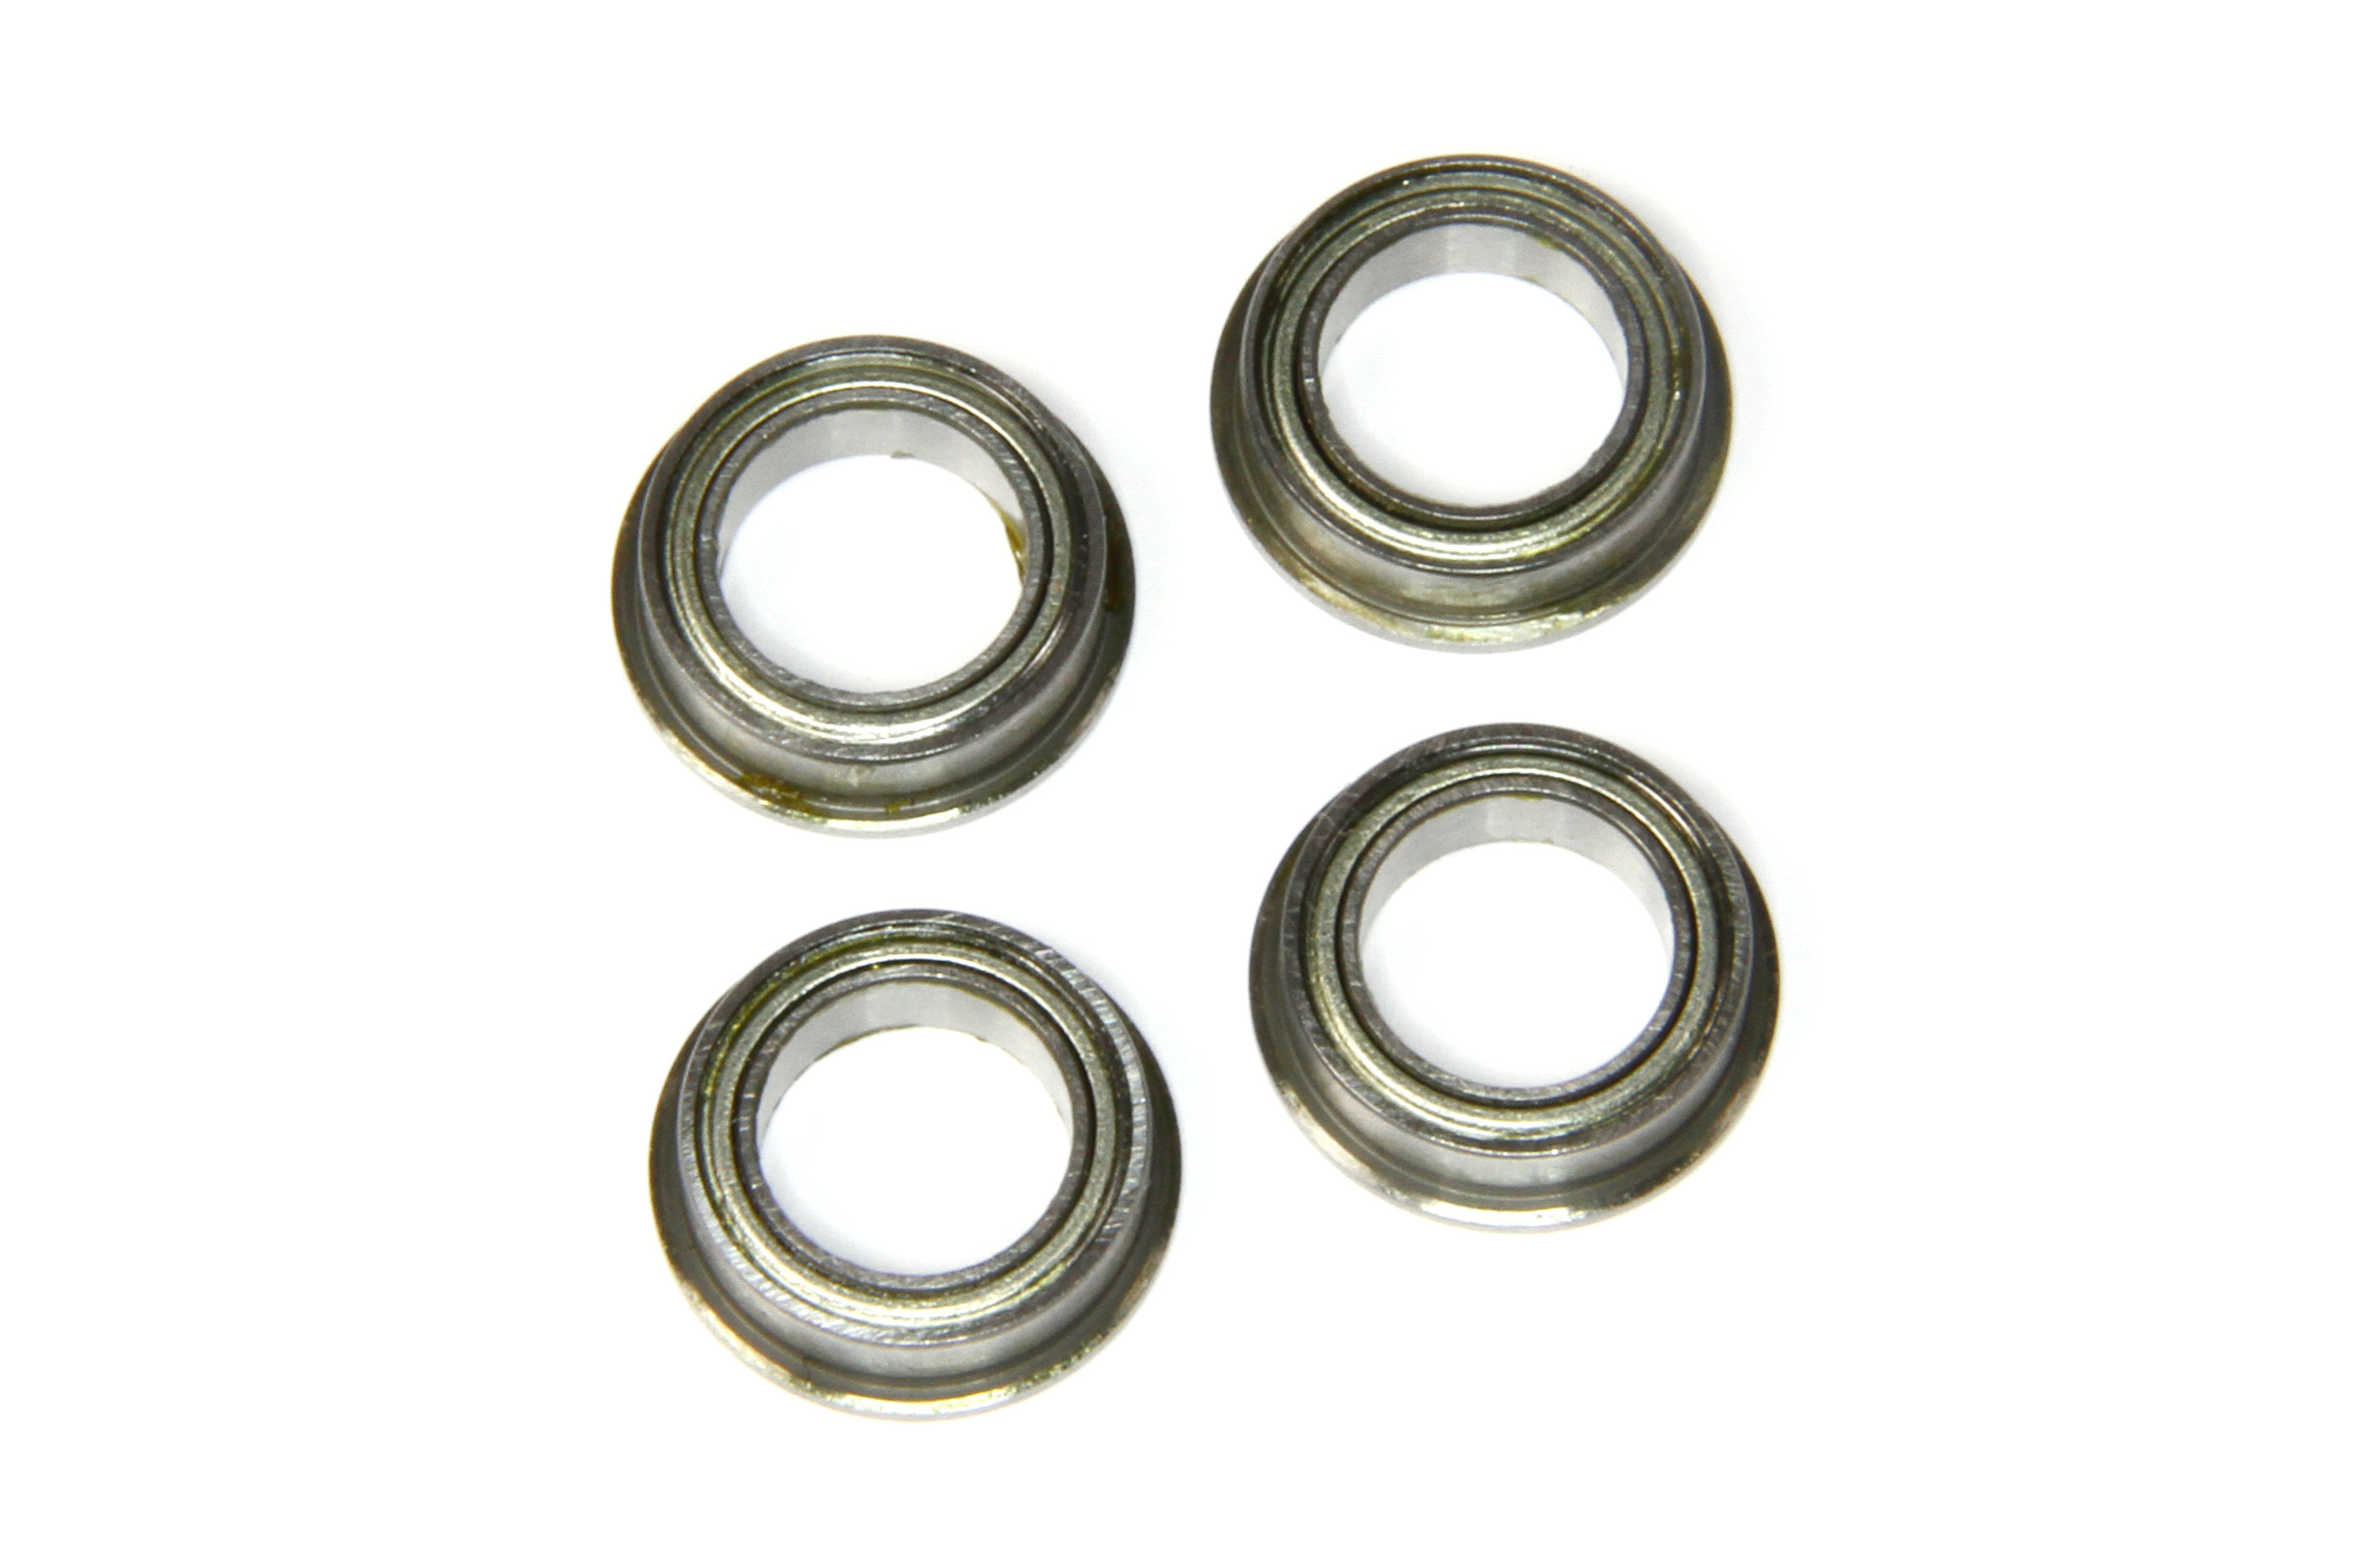 y2012-58/04LL Mecatech low-friction Flanged Bearing for Antiroll-Bar front and rear 8/12/3,5, set of 4